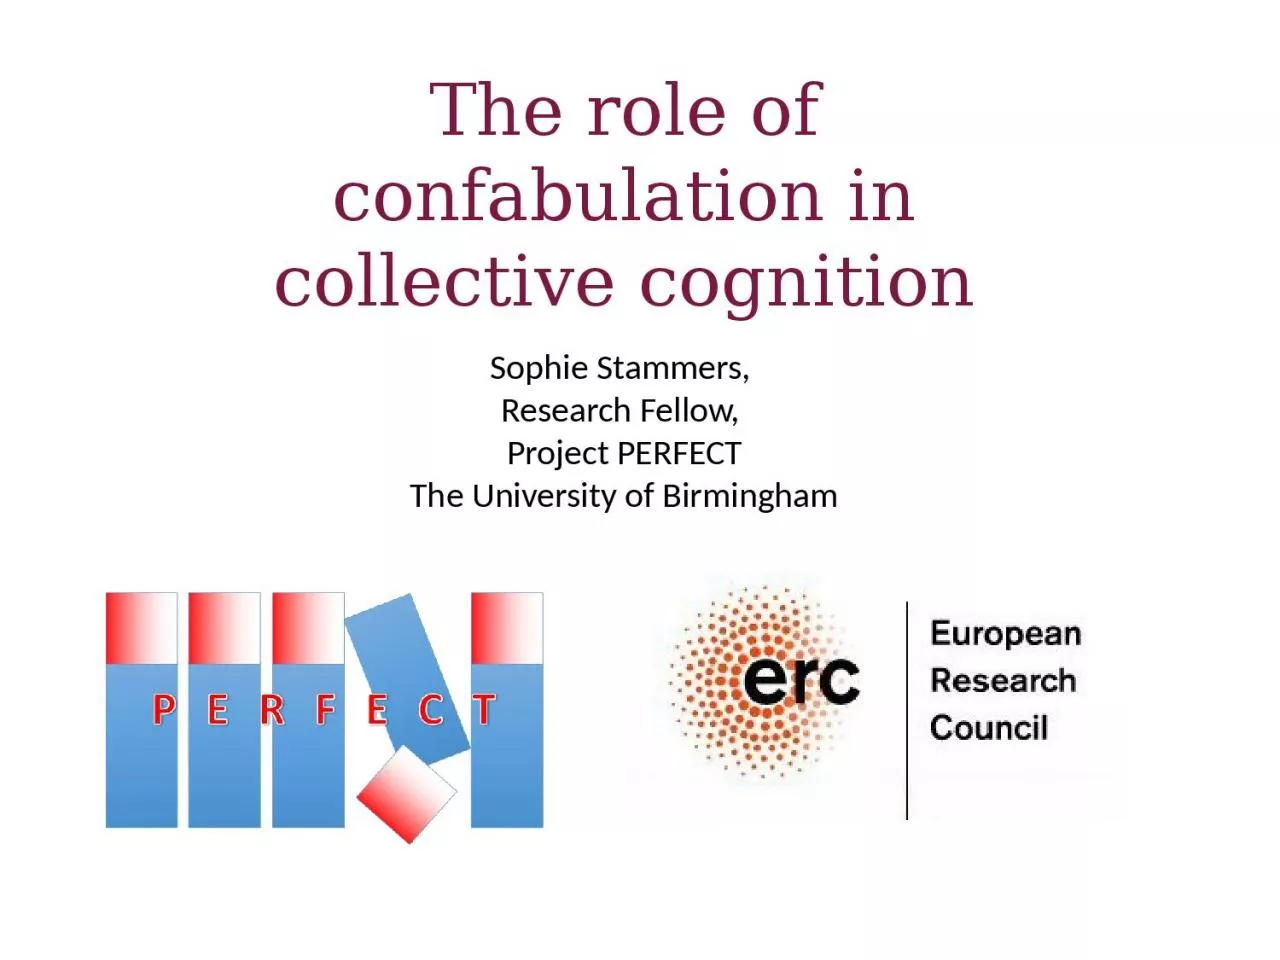 The role of confabulation in collective cognition